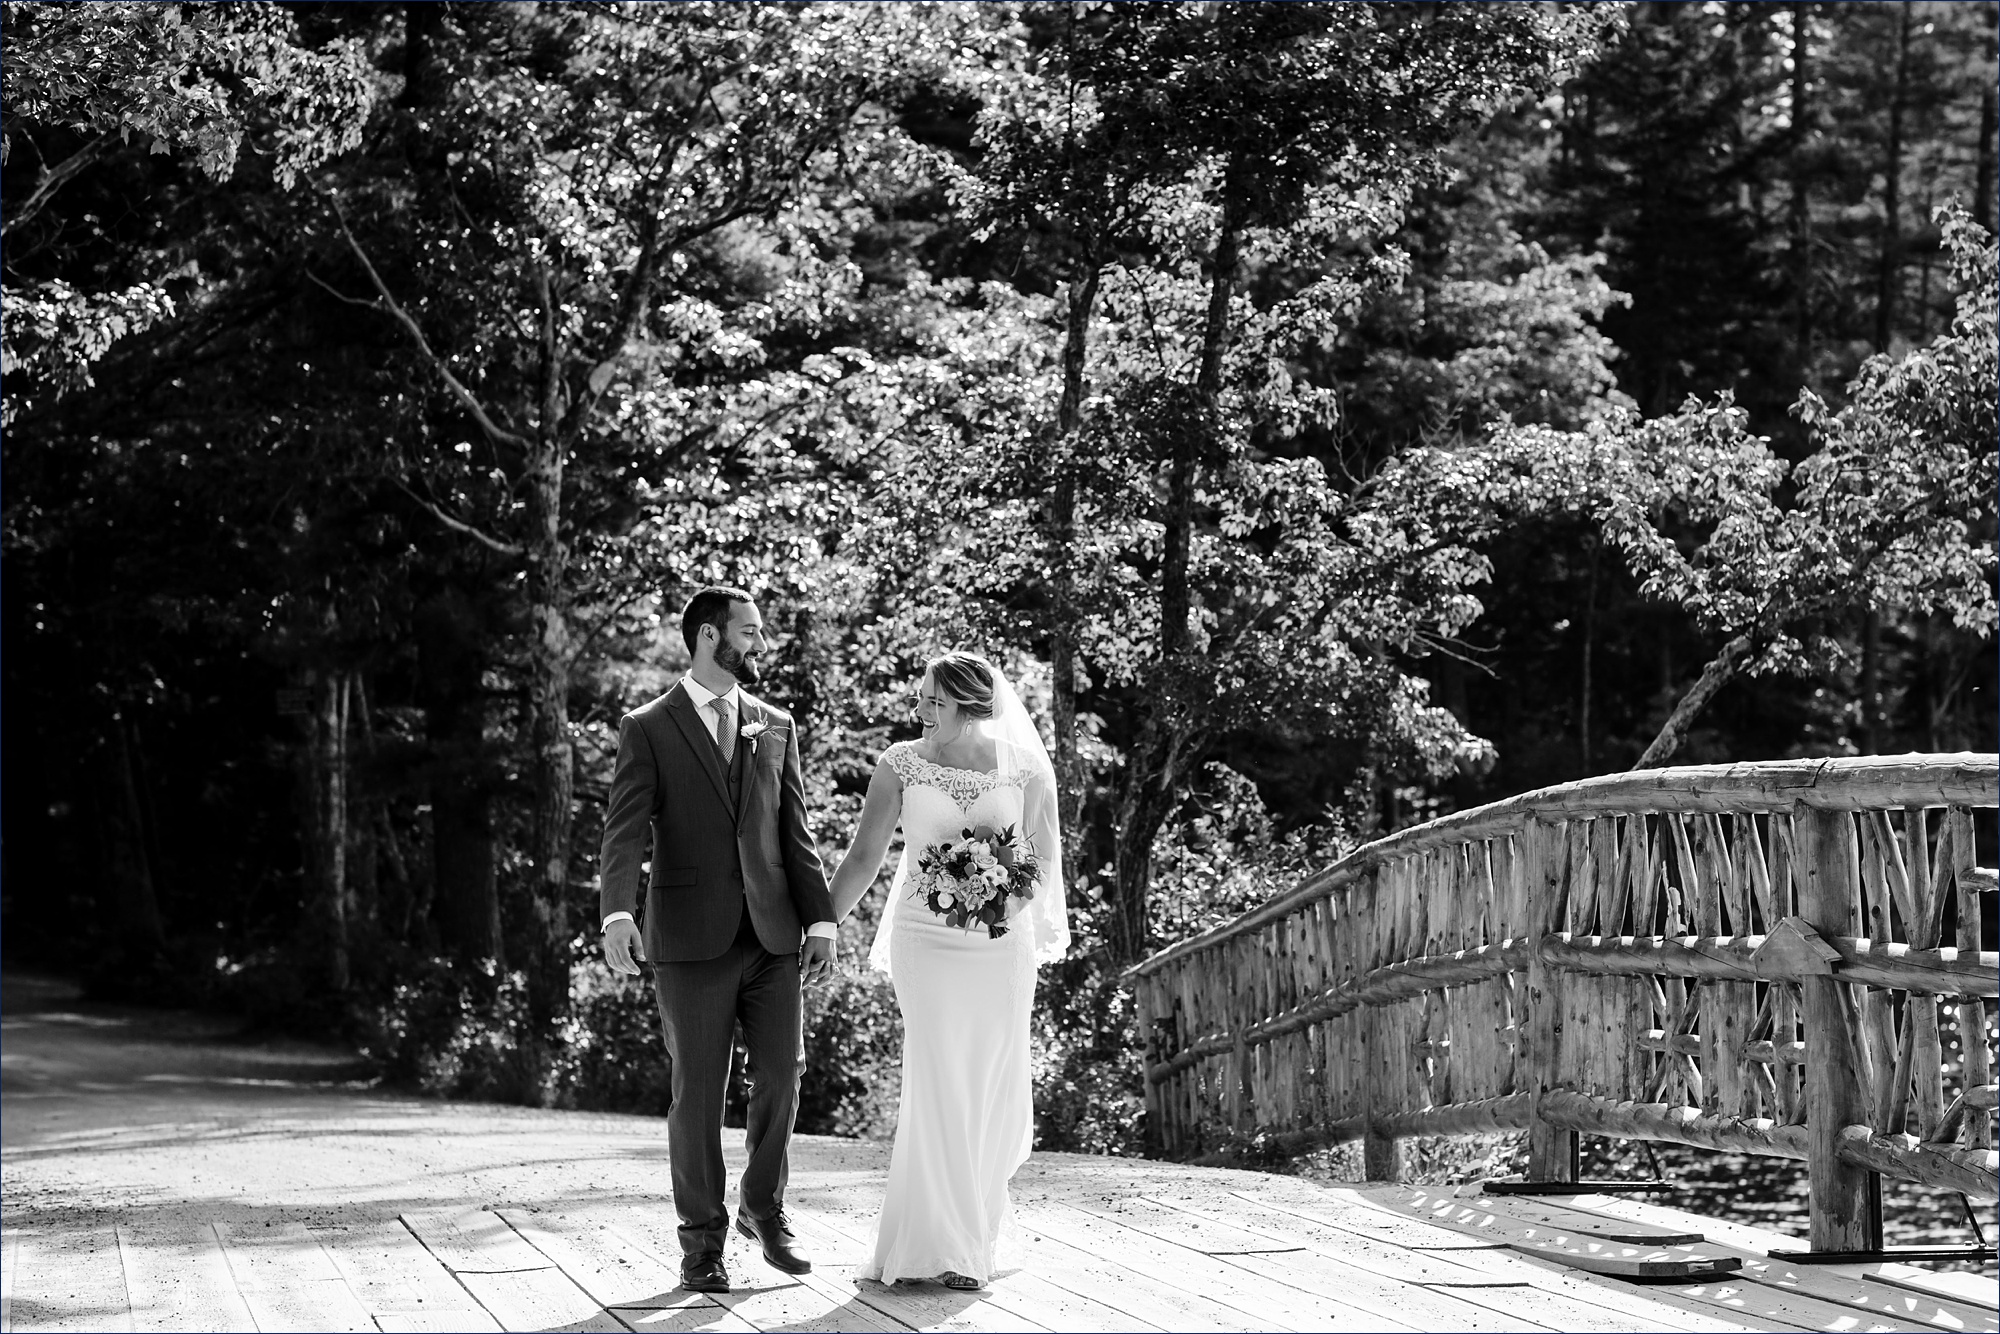 The newlyweds get ready to cross the bridge over Lake Chocorua New Hampshire after their wedding